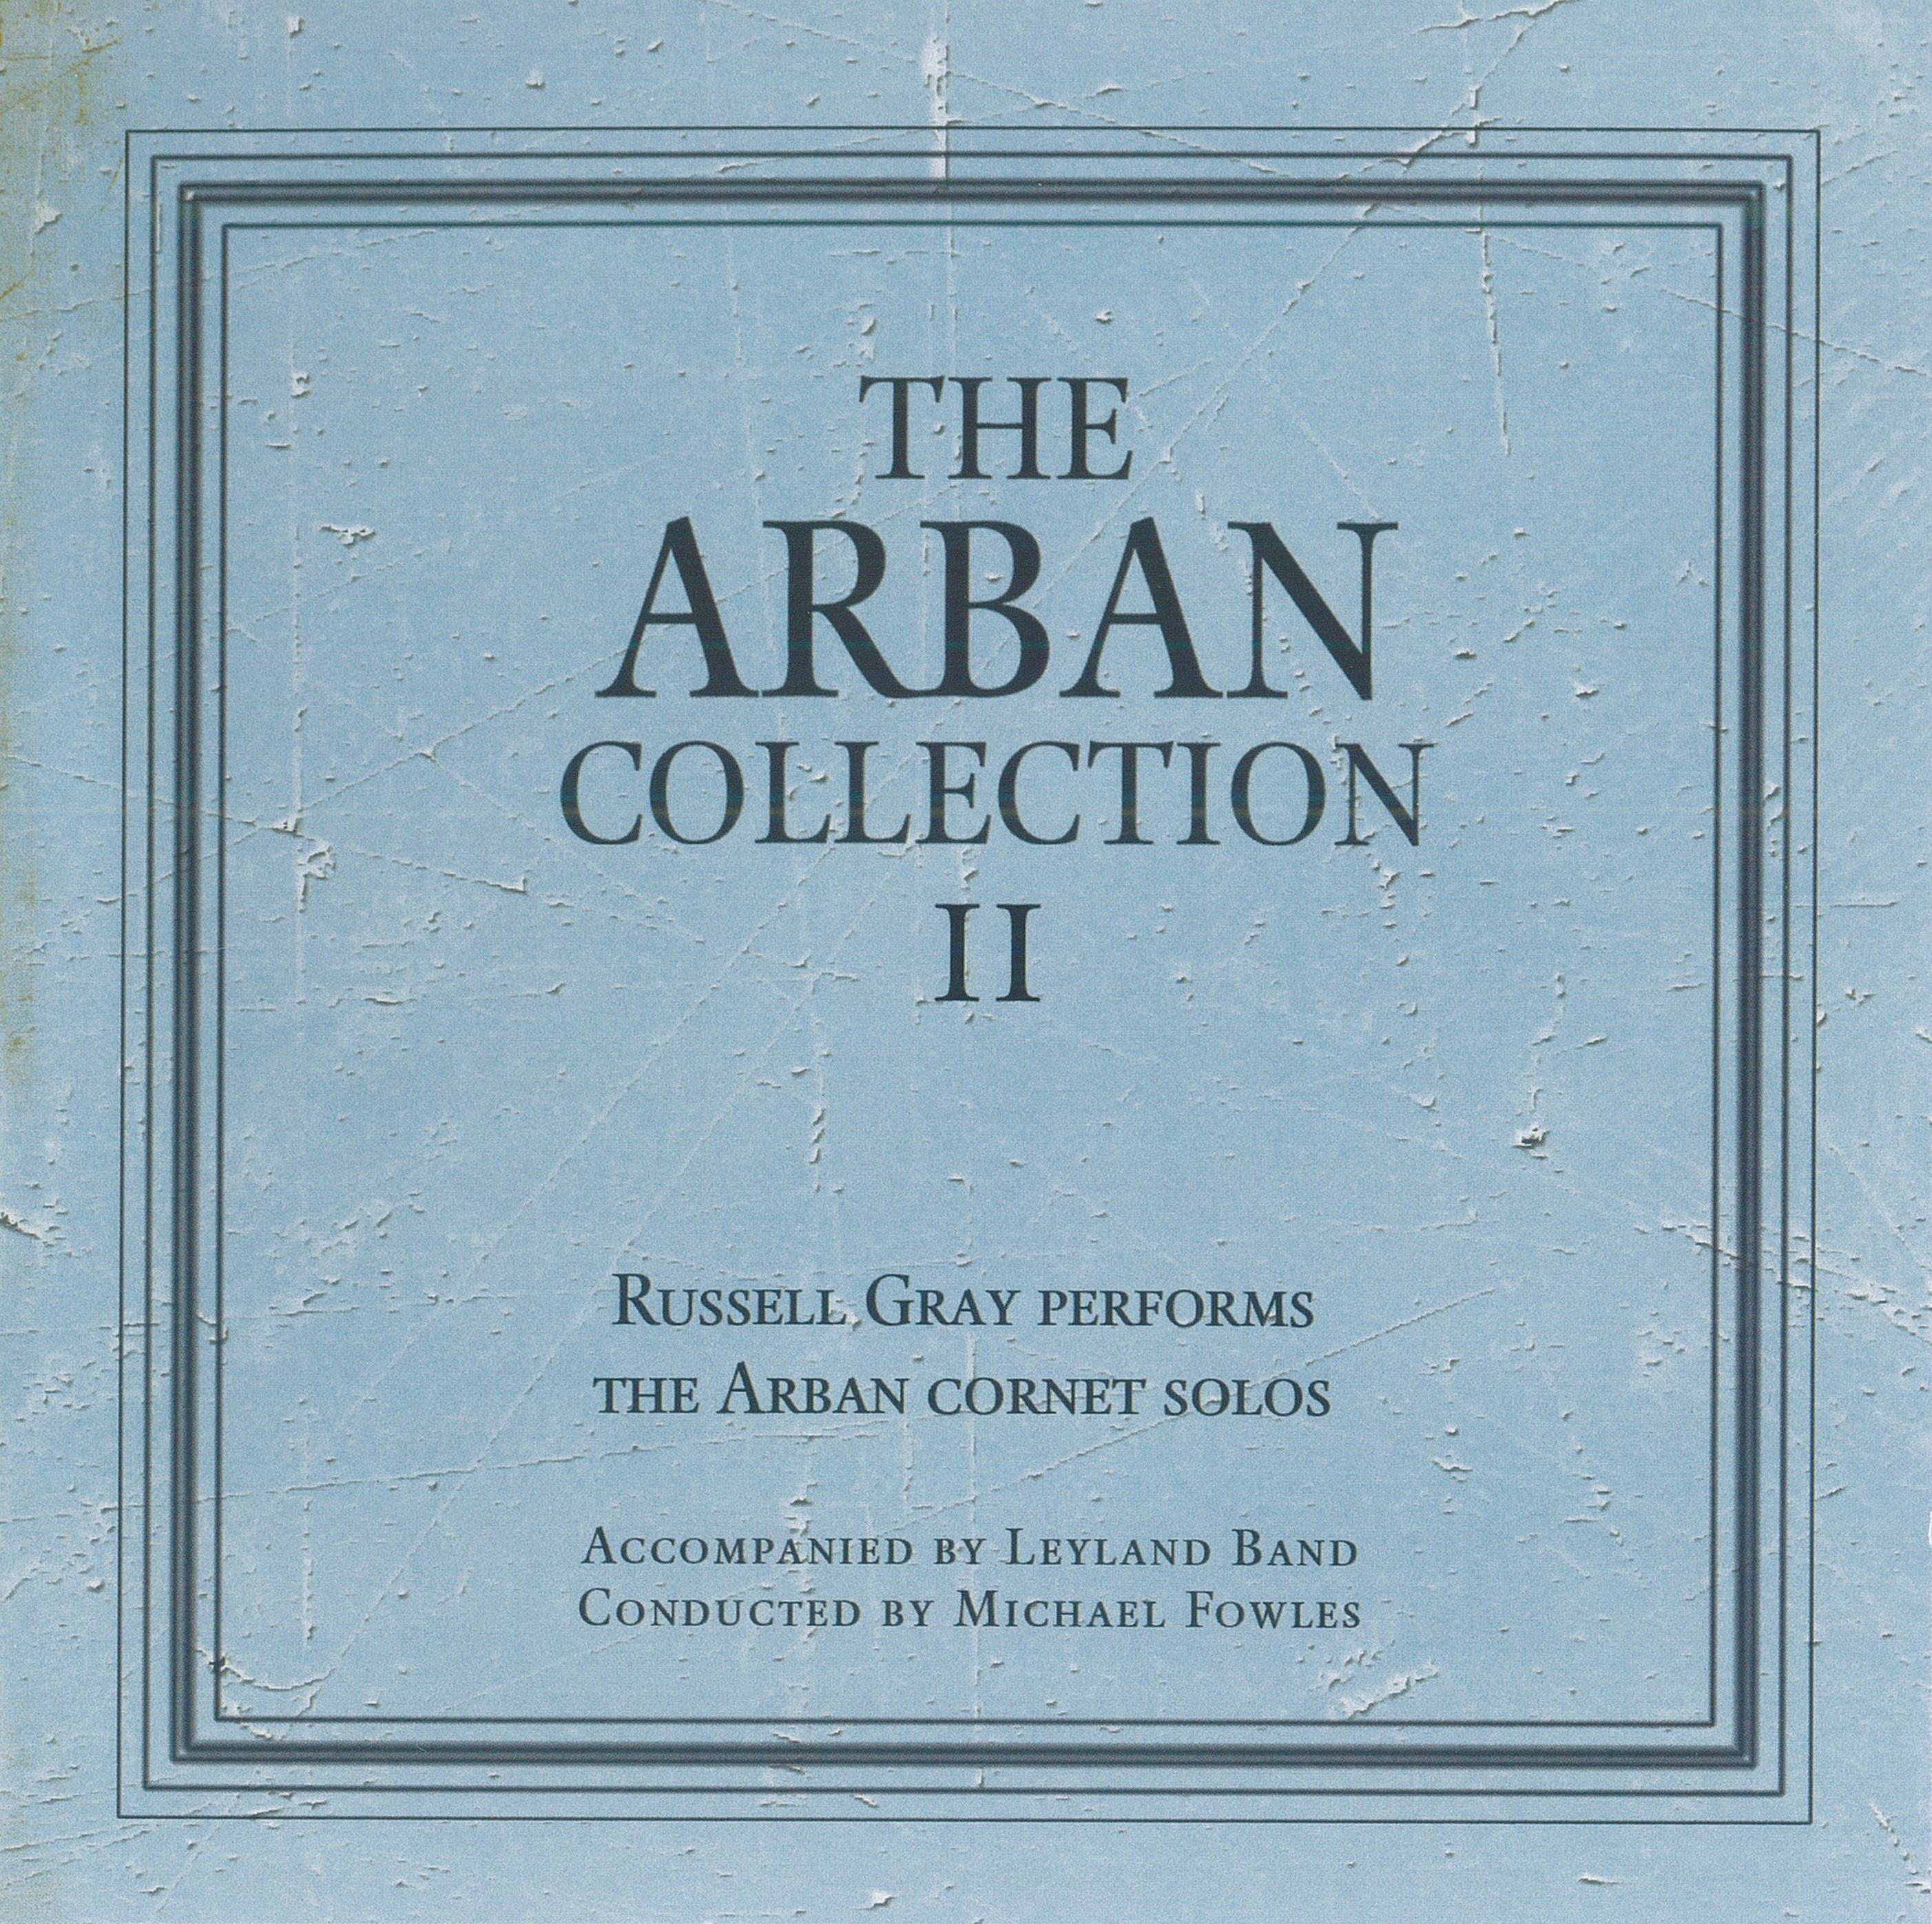 The Arban Collection II - CD